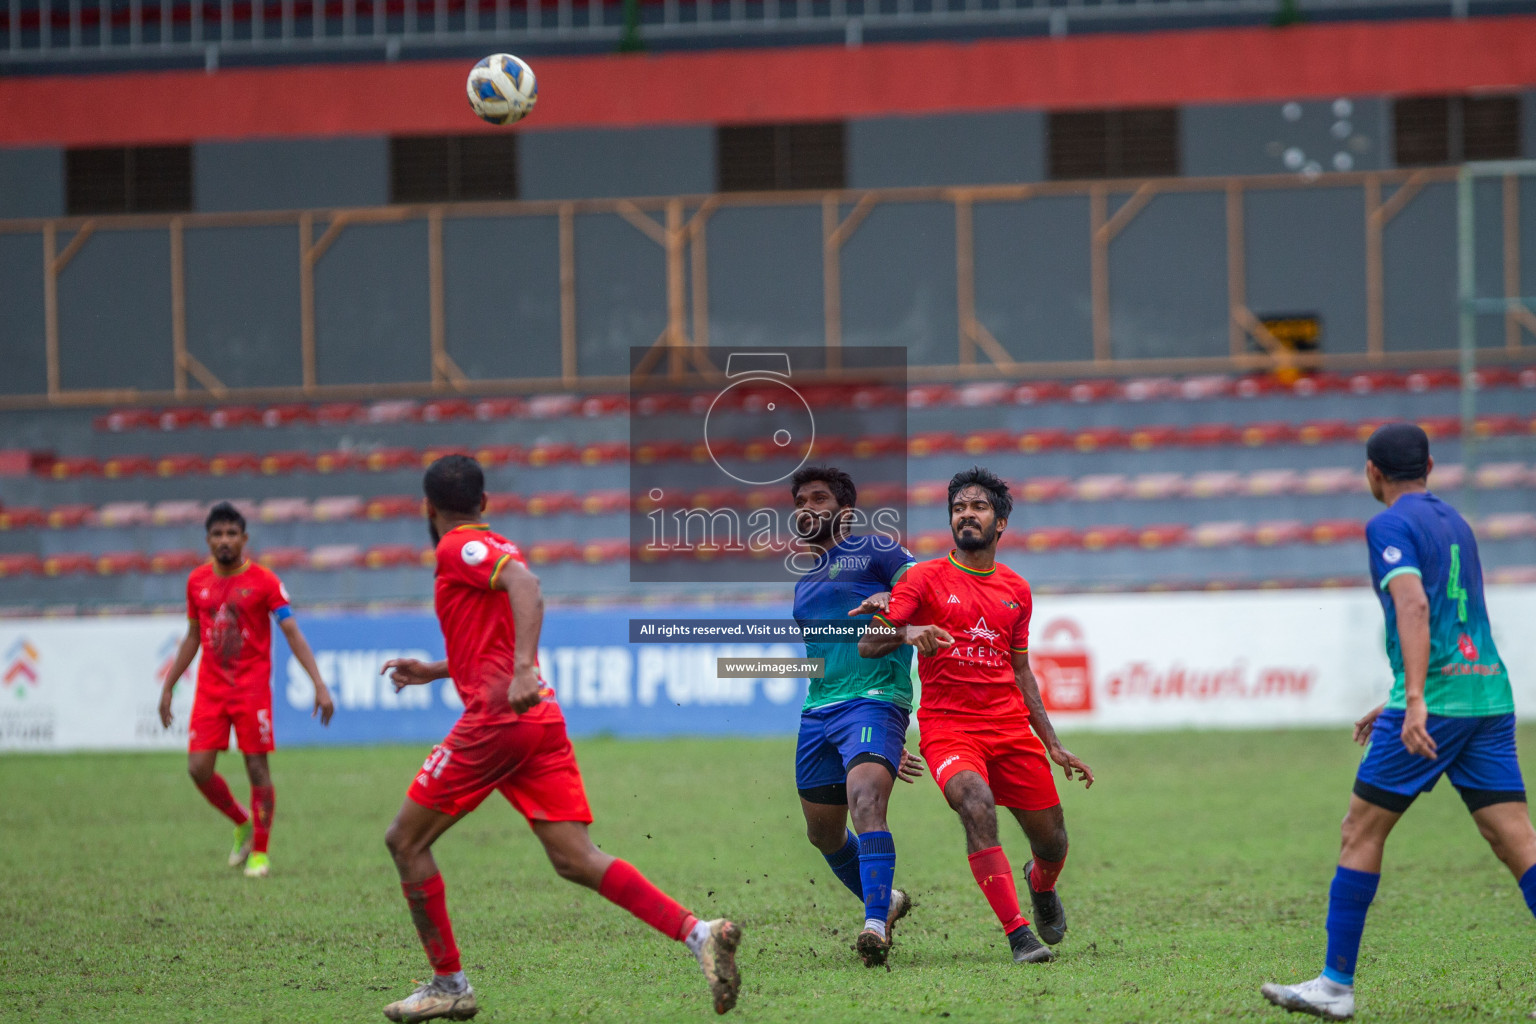 Da Grande Sports Club vs Super United Sports in Ooredoo Dhivehi Premier League 2021/22 on 31st July 2022, held in National Football Stadium, Male', Maldives Photos: Ismail Thoriq/ Images mv